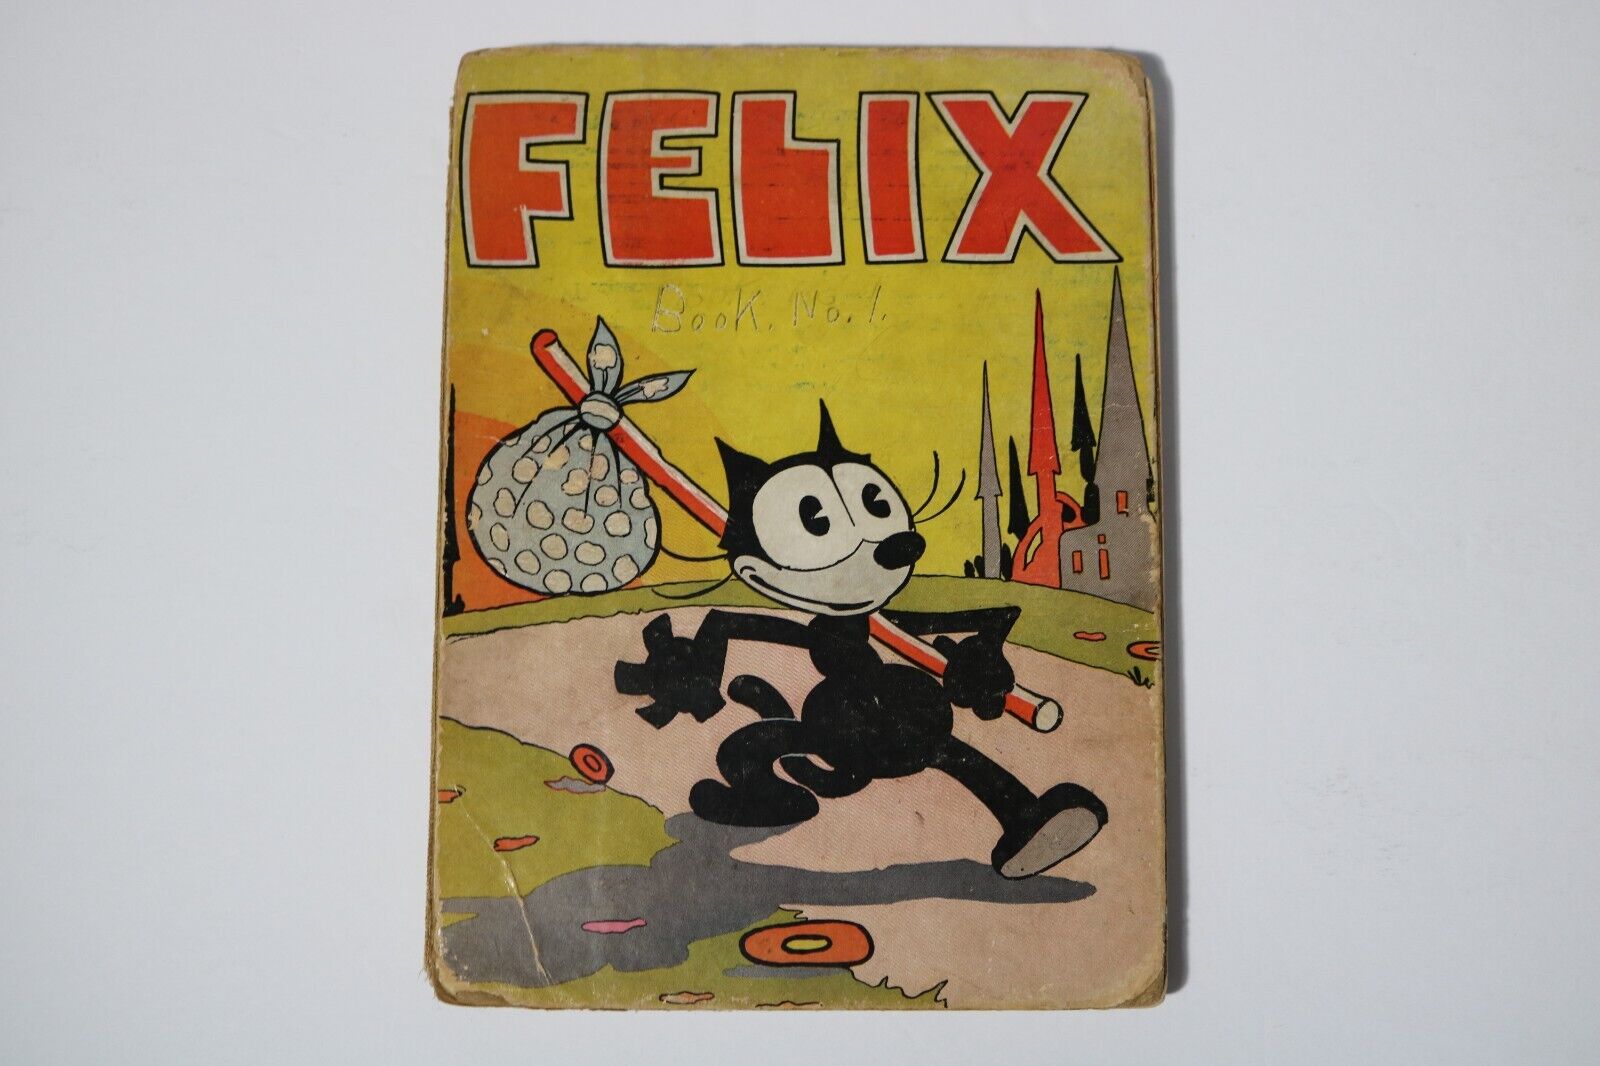 VERY RARE 1931 FELIX THE CAT HENRY ALTEMUS COMIC BOOK #1 1ST EDITION PRINTING